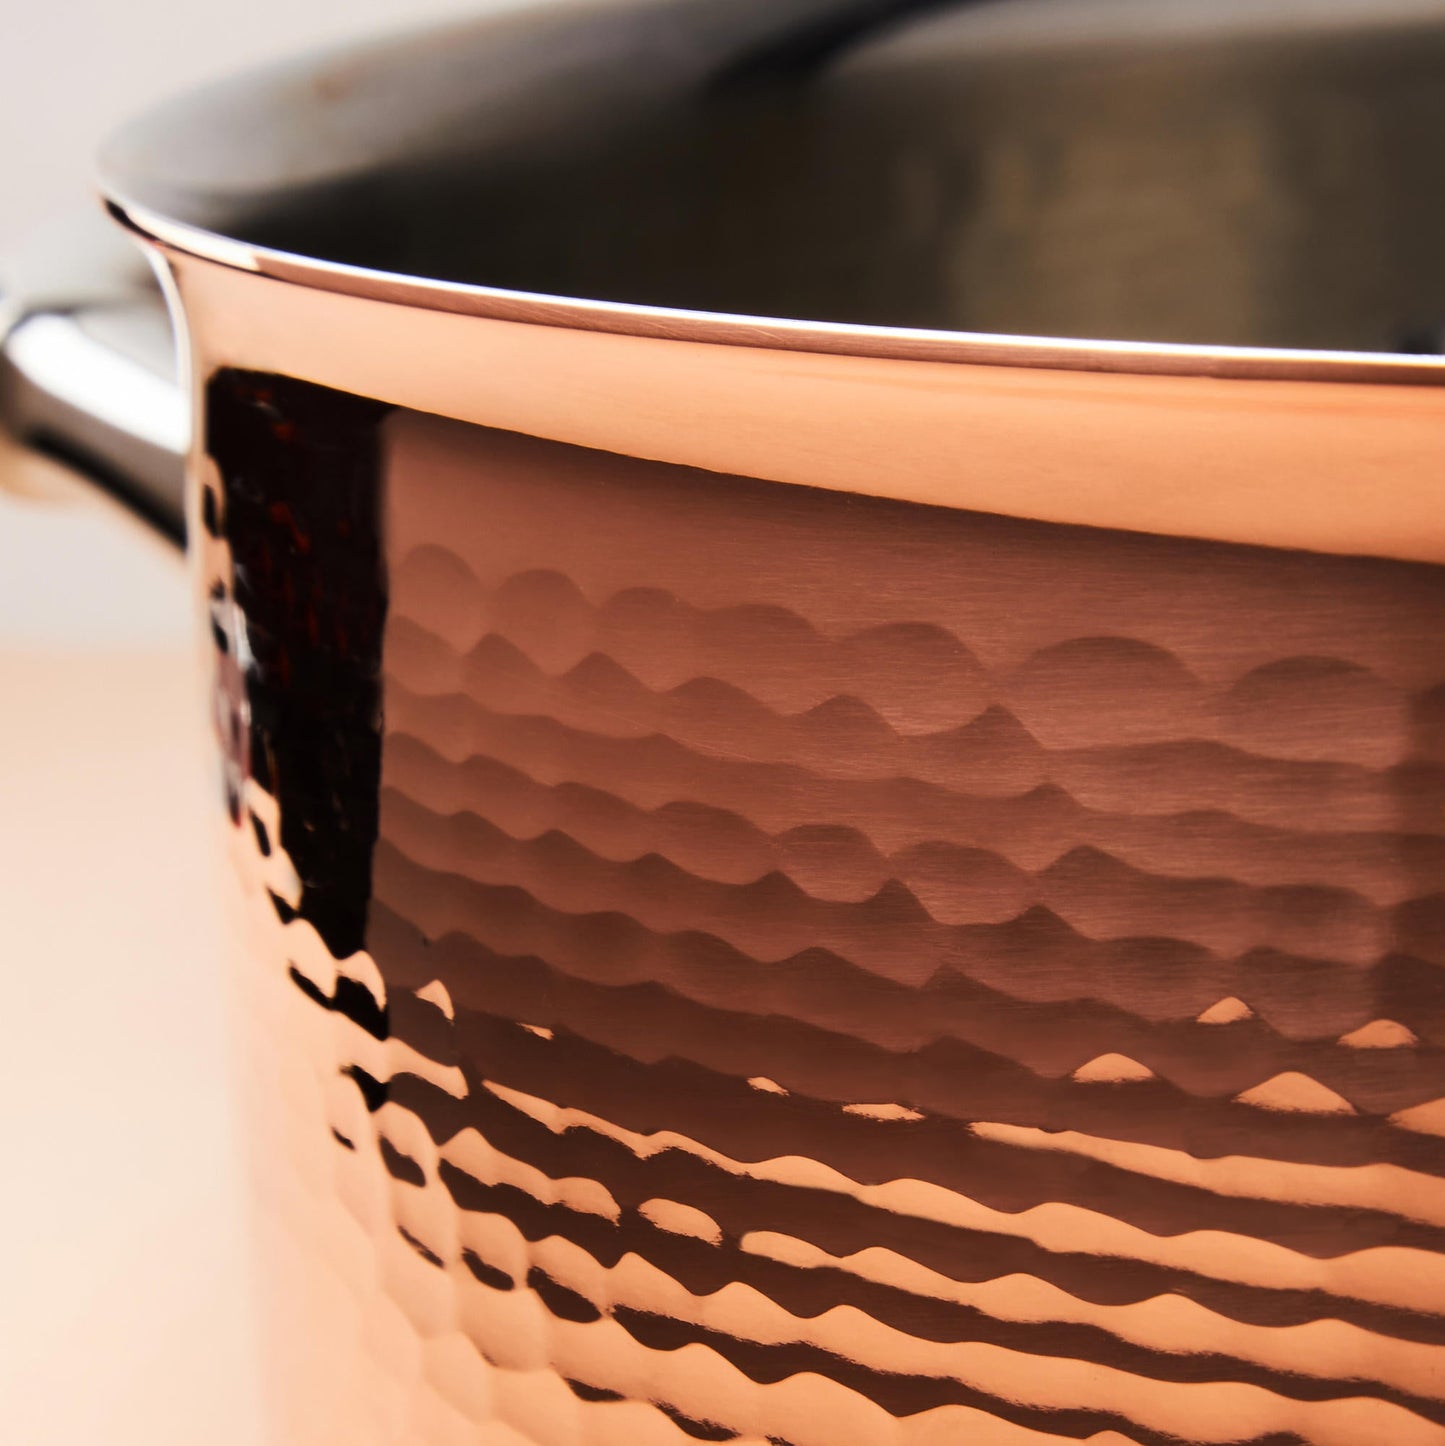 Hammering increases strength and beauty of copper clad with stainless steel  braiser from Ruffoni